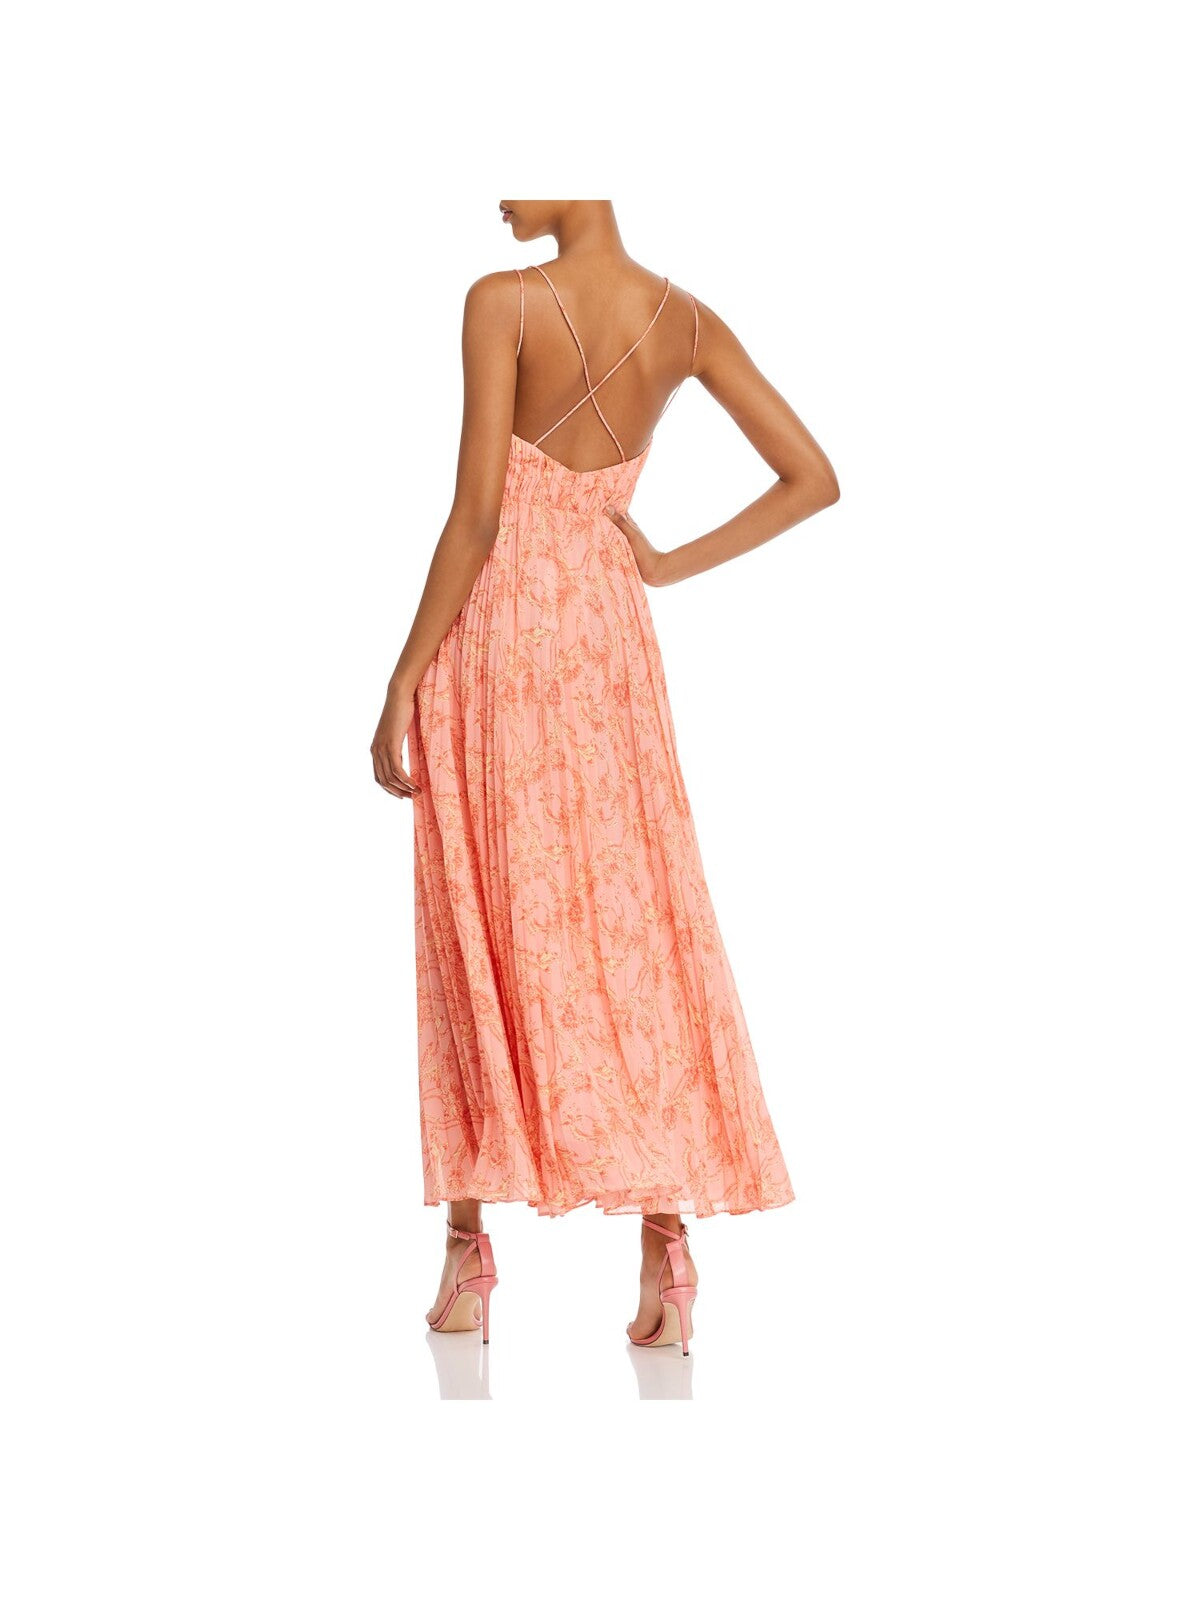 AMUR Womens Orange Cut Out Zippered Sheer Lined Pleated Floral Spaghetti Strap V Neck Maxi Party Fit + Flare Dress 8